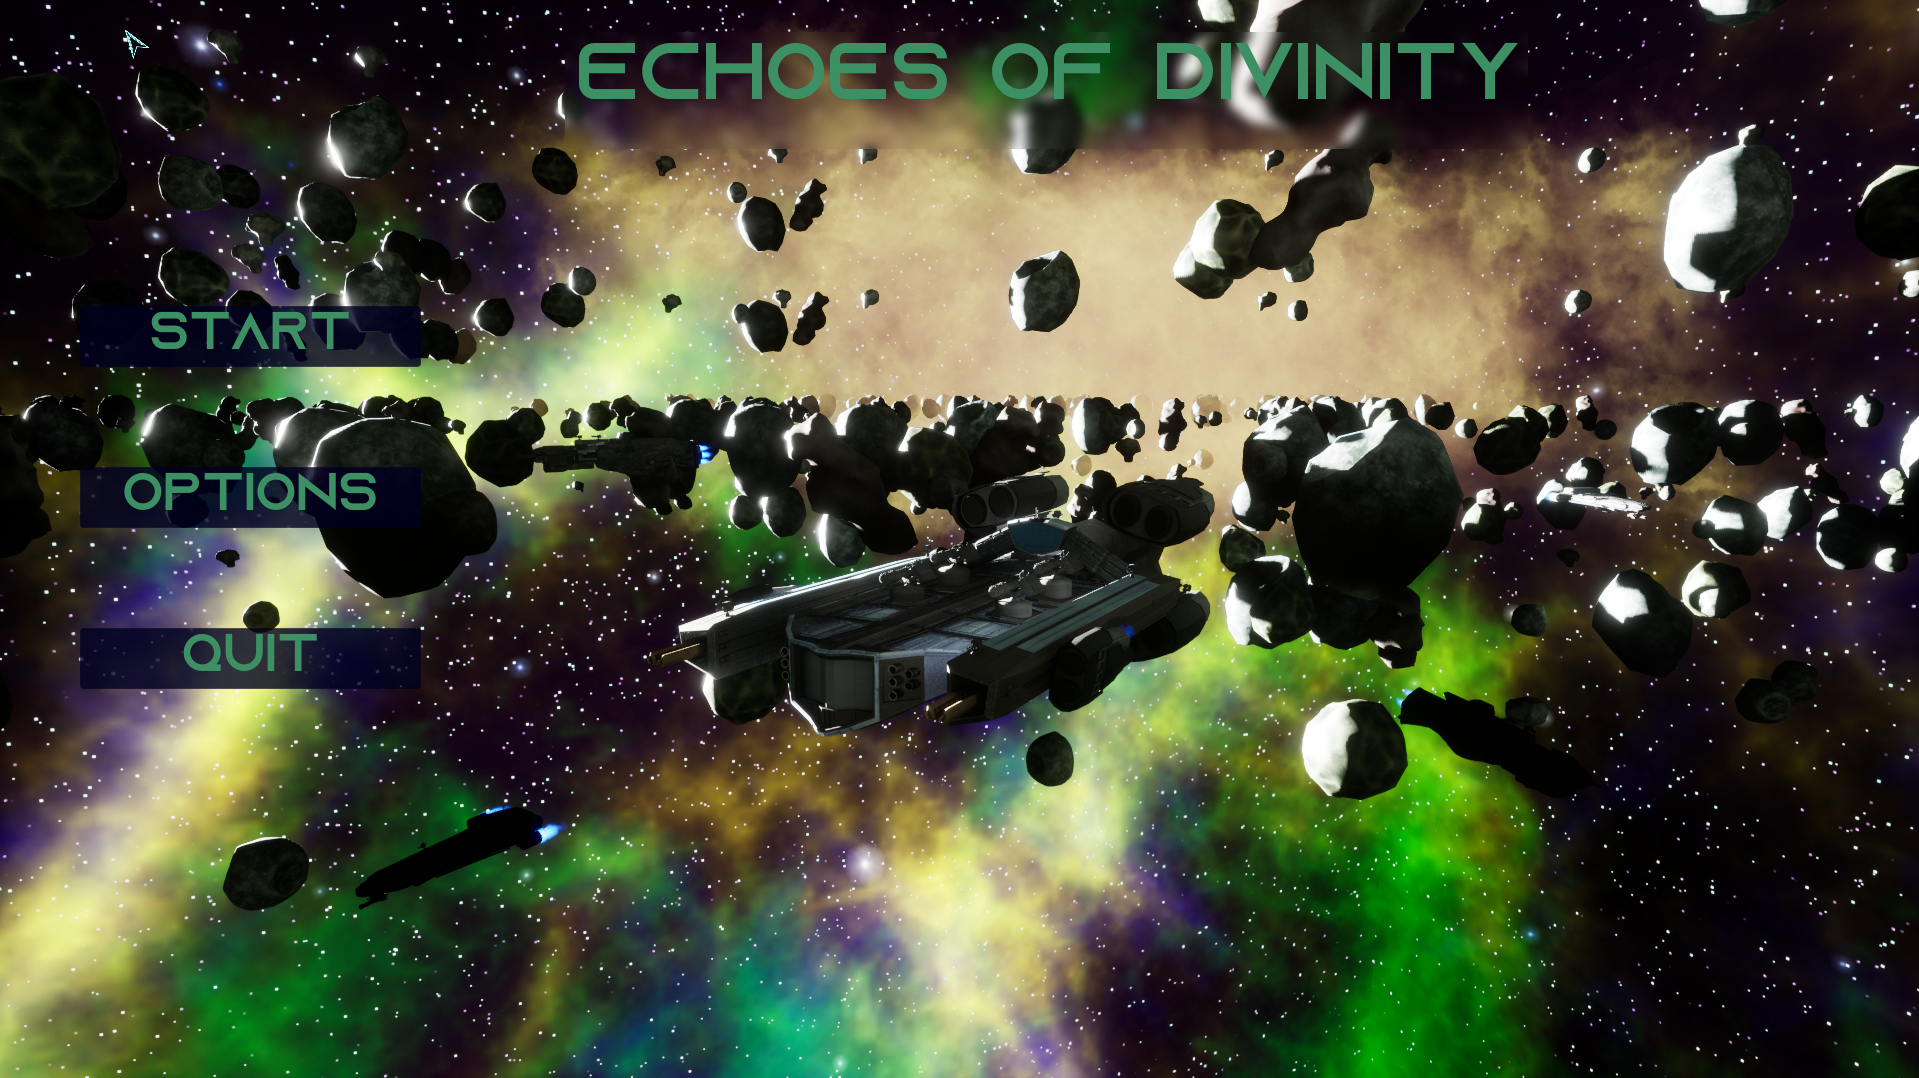 Echoes of Divintiy